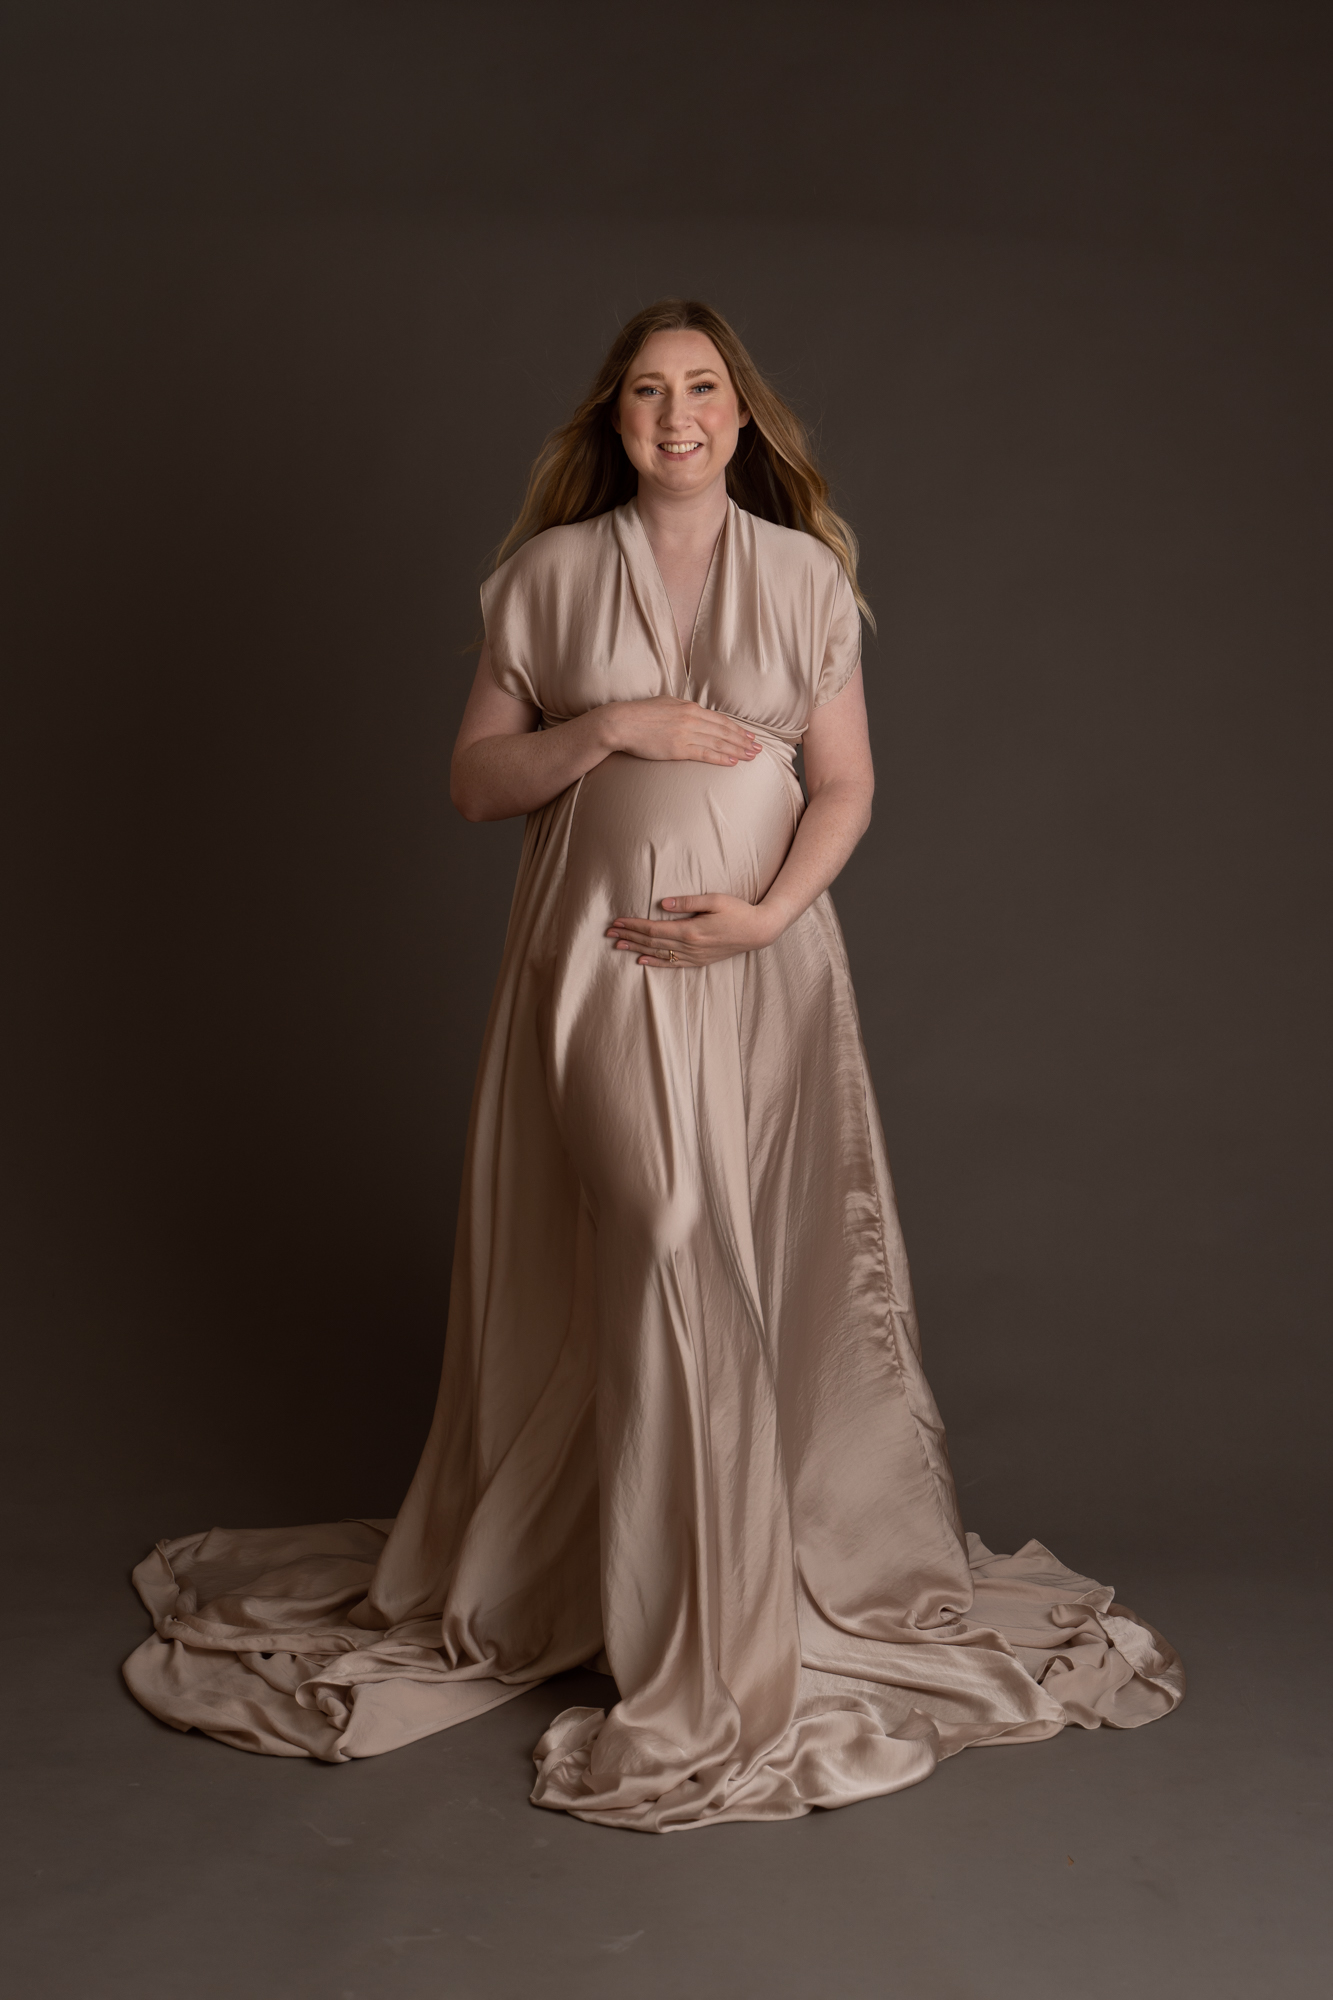 maternity photoshoot image of pregnant woman wearing an elegant silk dress showing off her pregnancy bump by edinburgh maternity photographer beautiful bairns photography